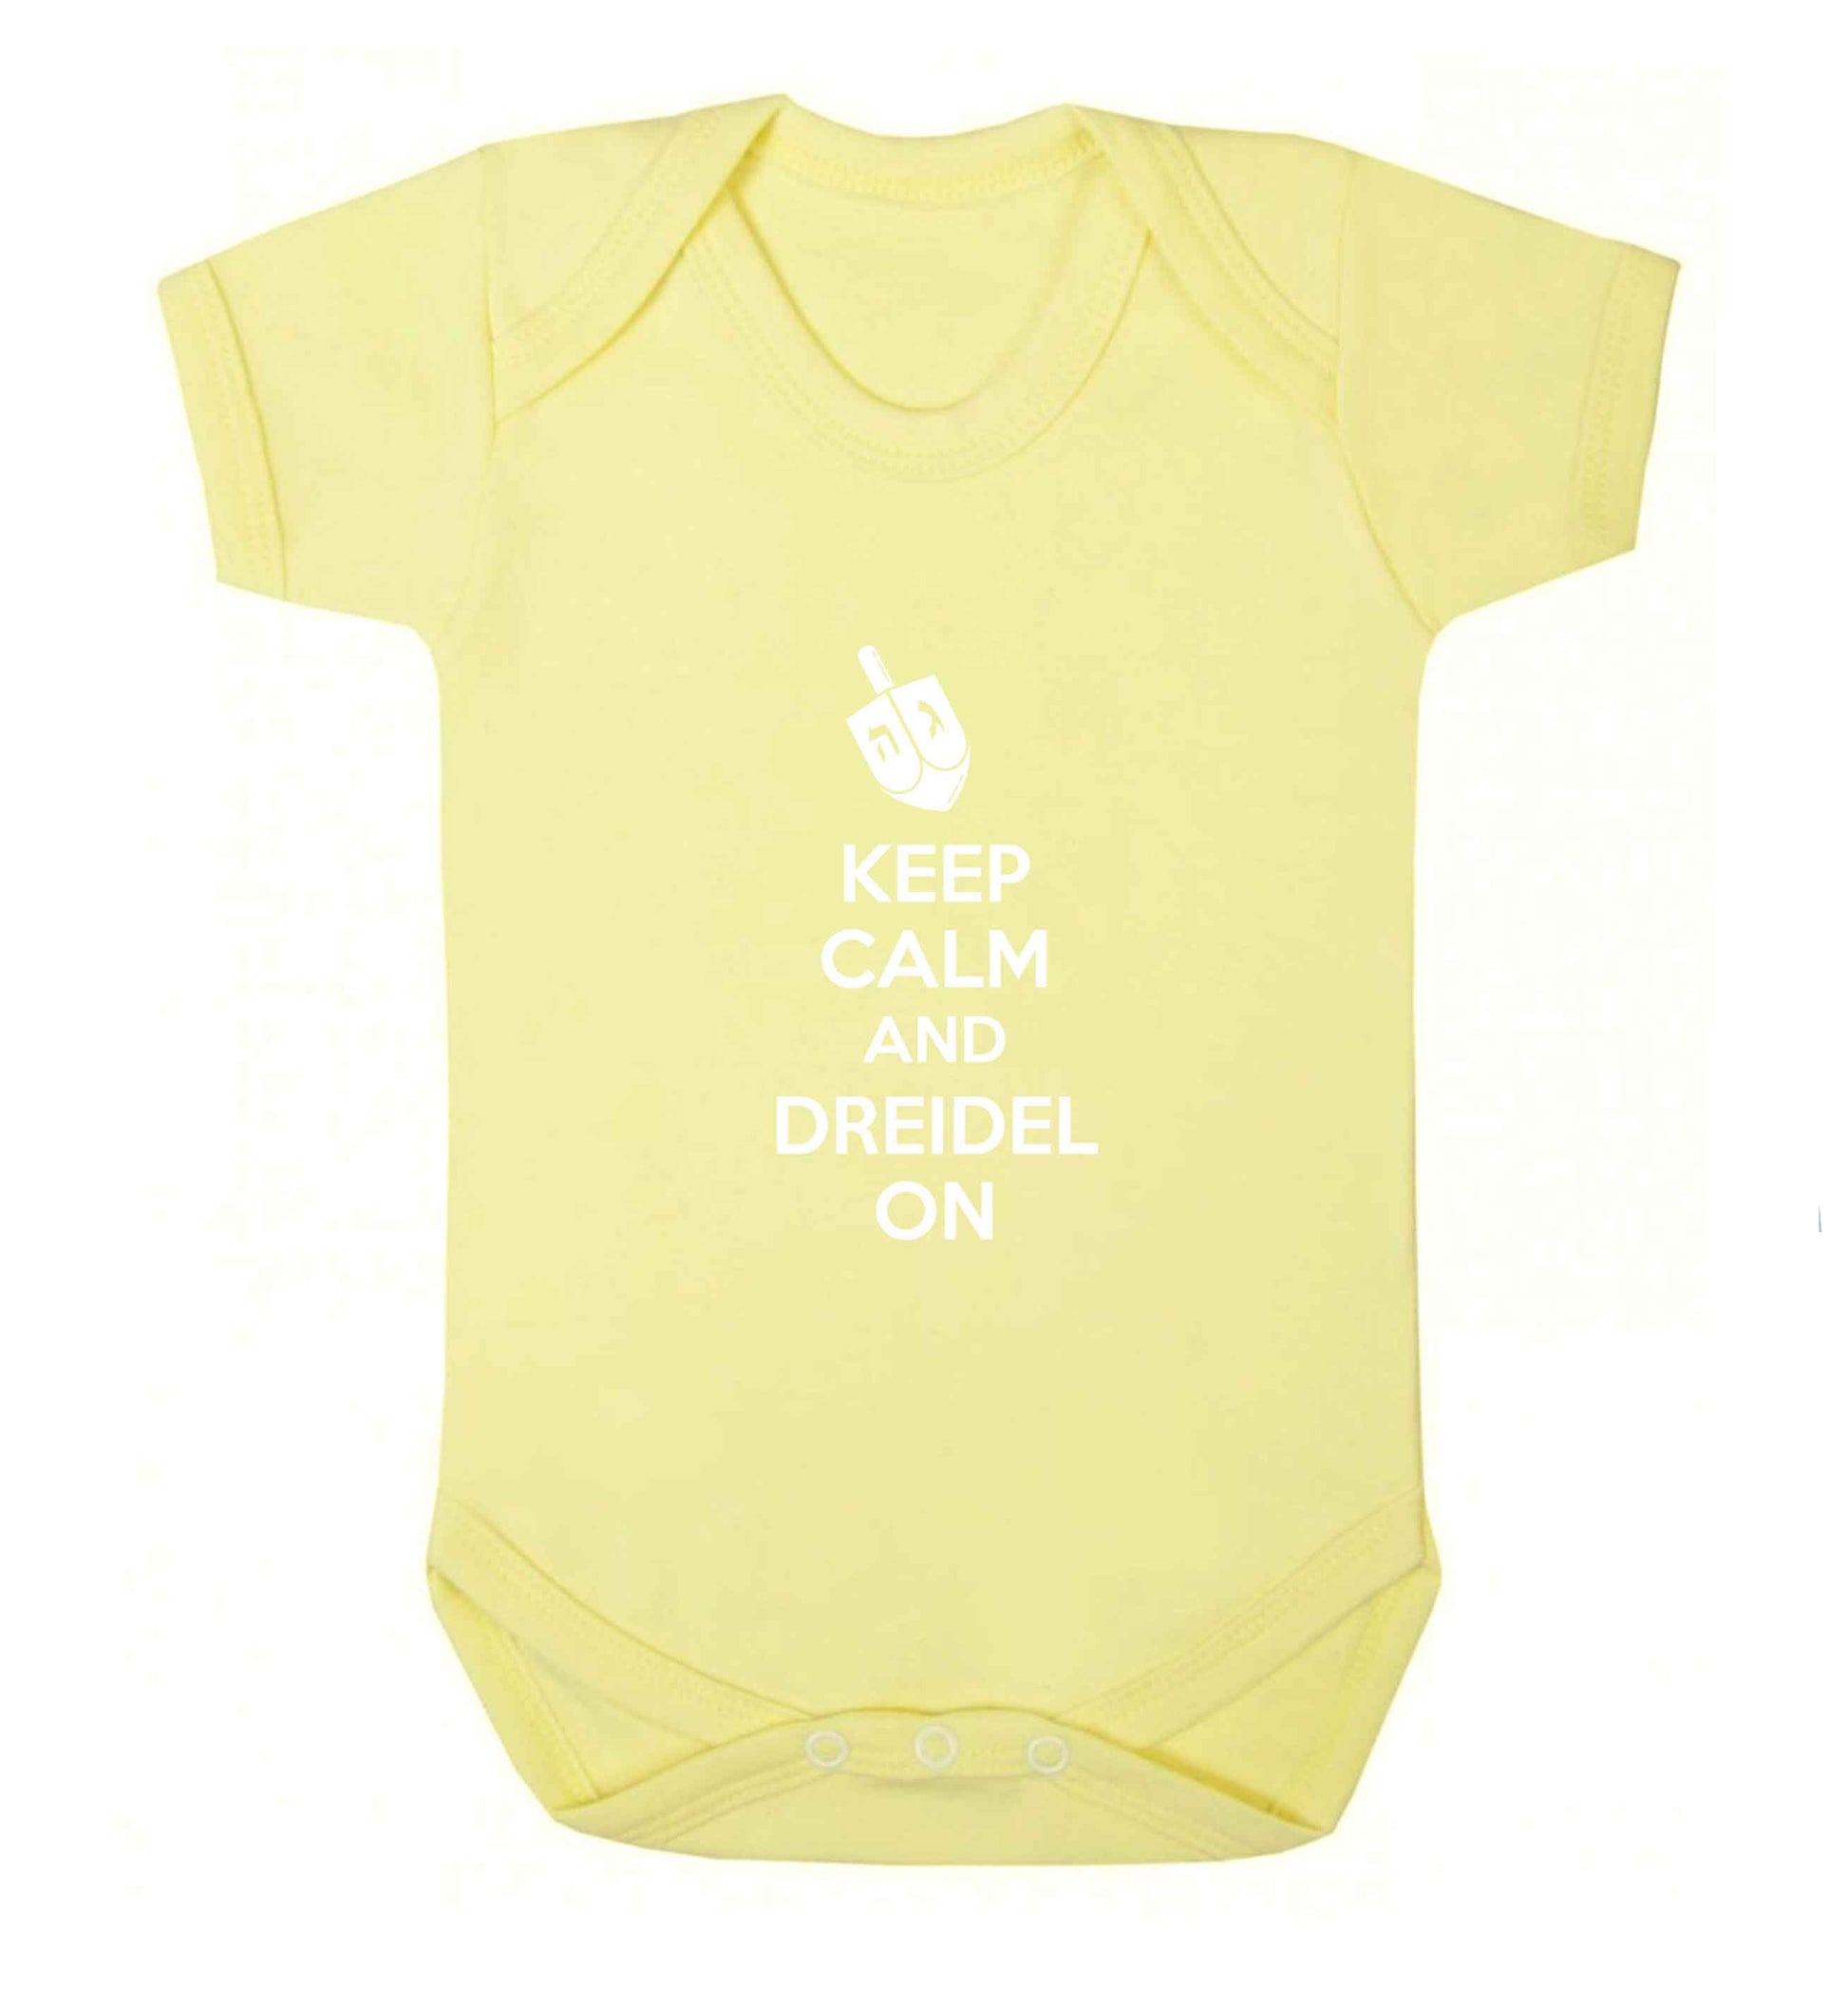 Keep calm and dreidel on baby vest pale yellow 18-24 months